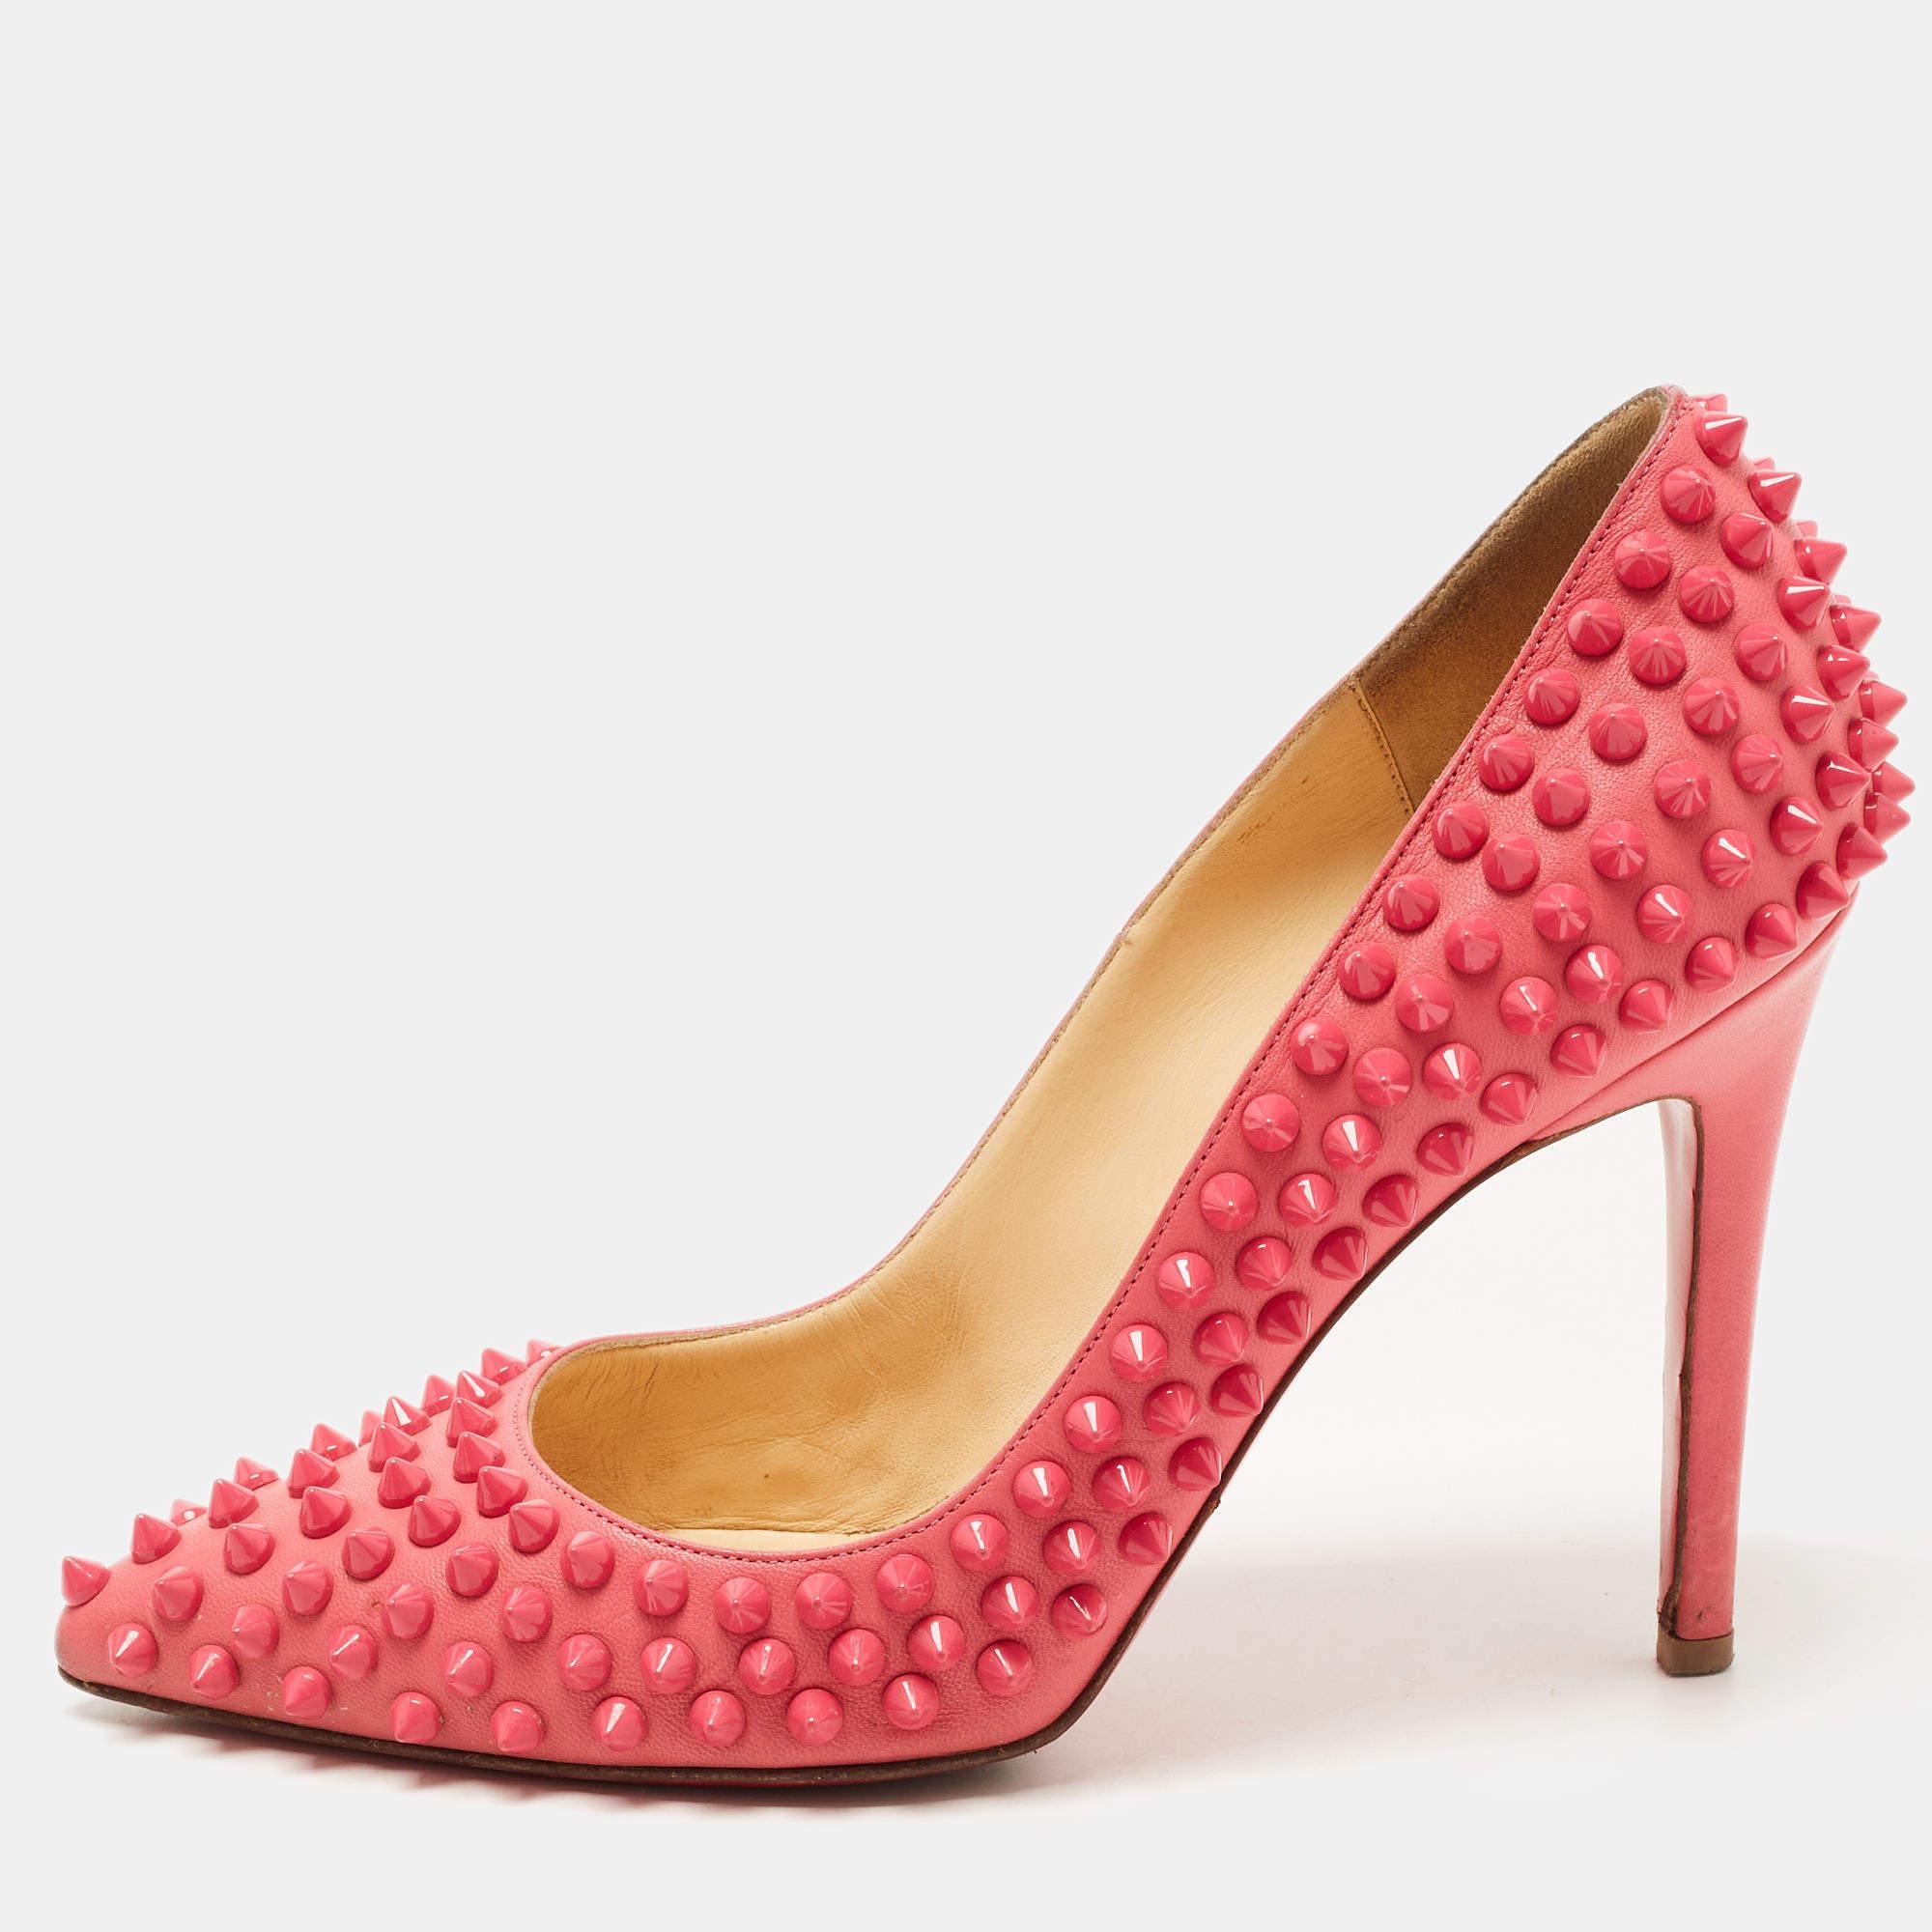 Women's Christian Louboutin Pink Leather Pigalle Spikes Pumps Size 37